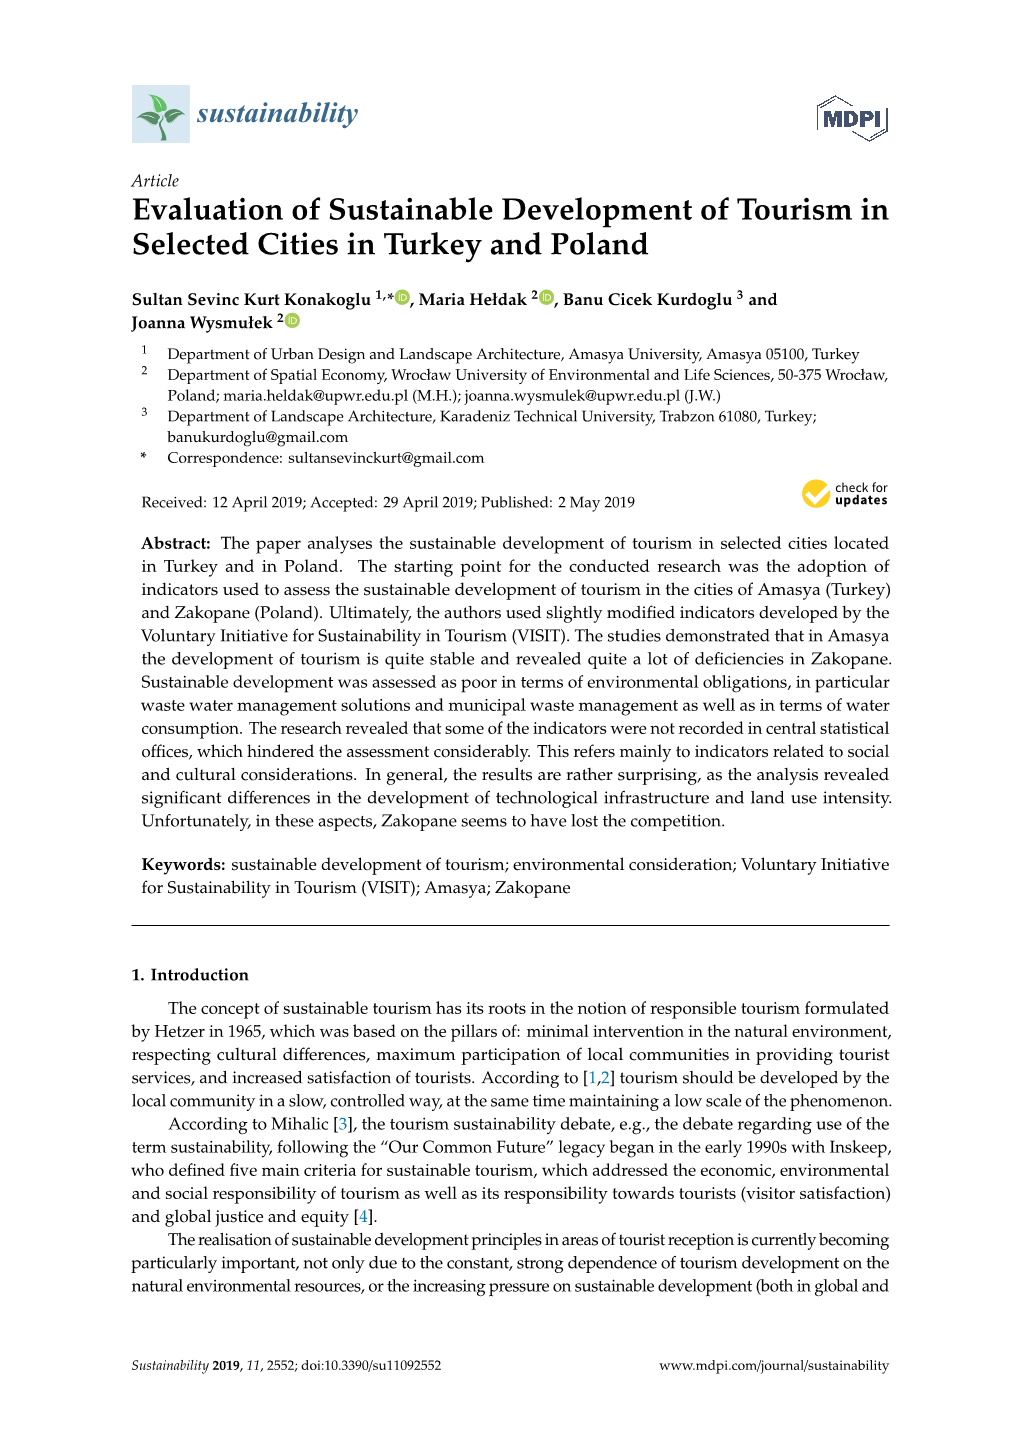 Evaluation of Sustainable Development of Tourism in Selected Cities in Turkey and Poland